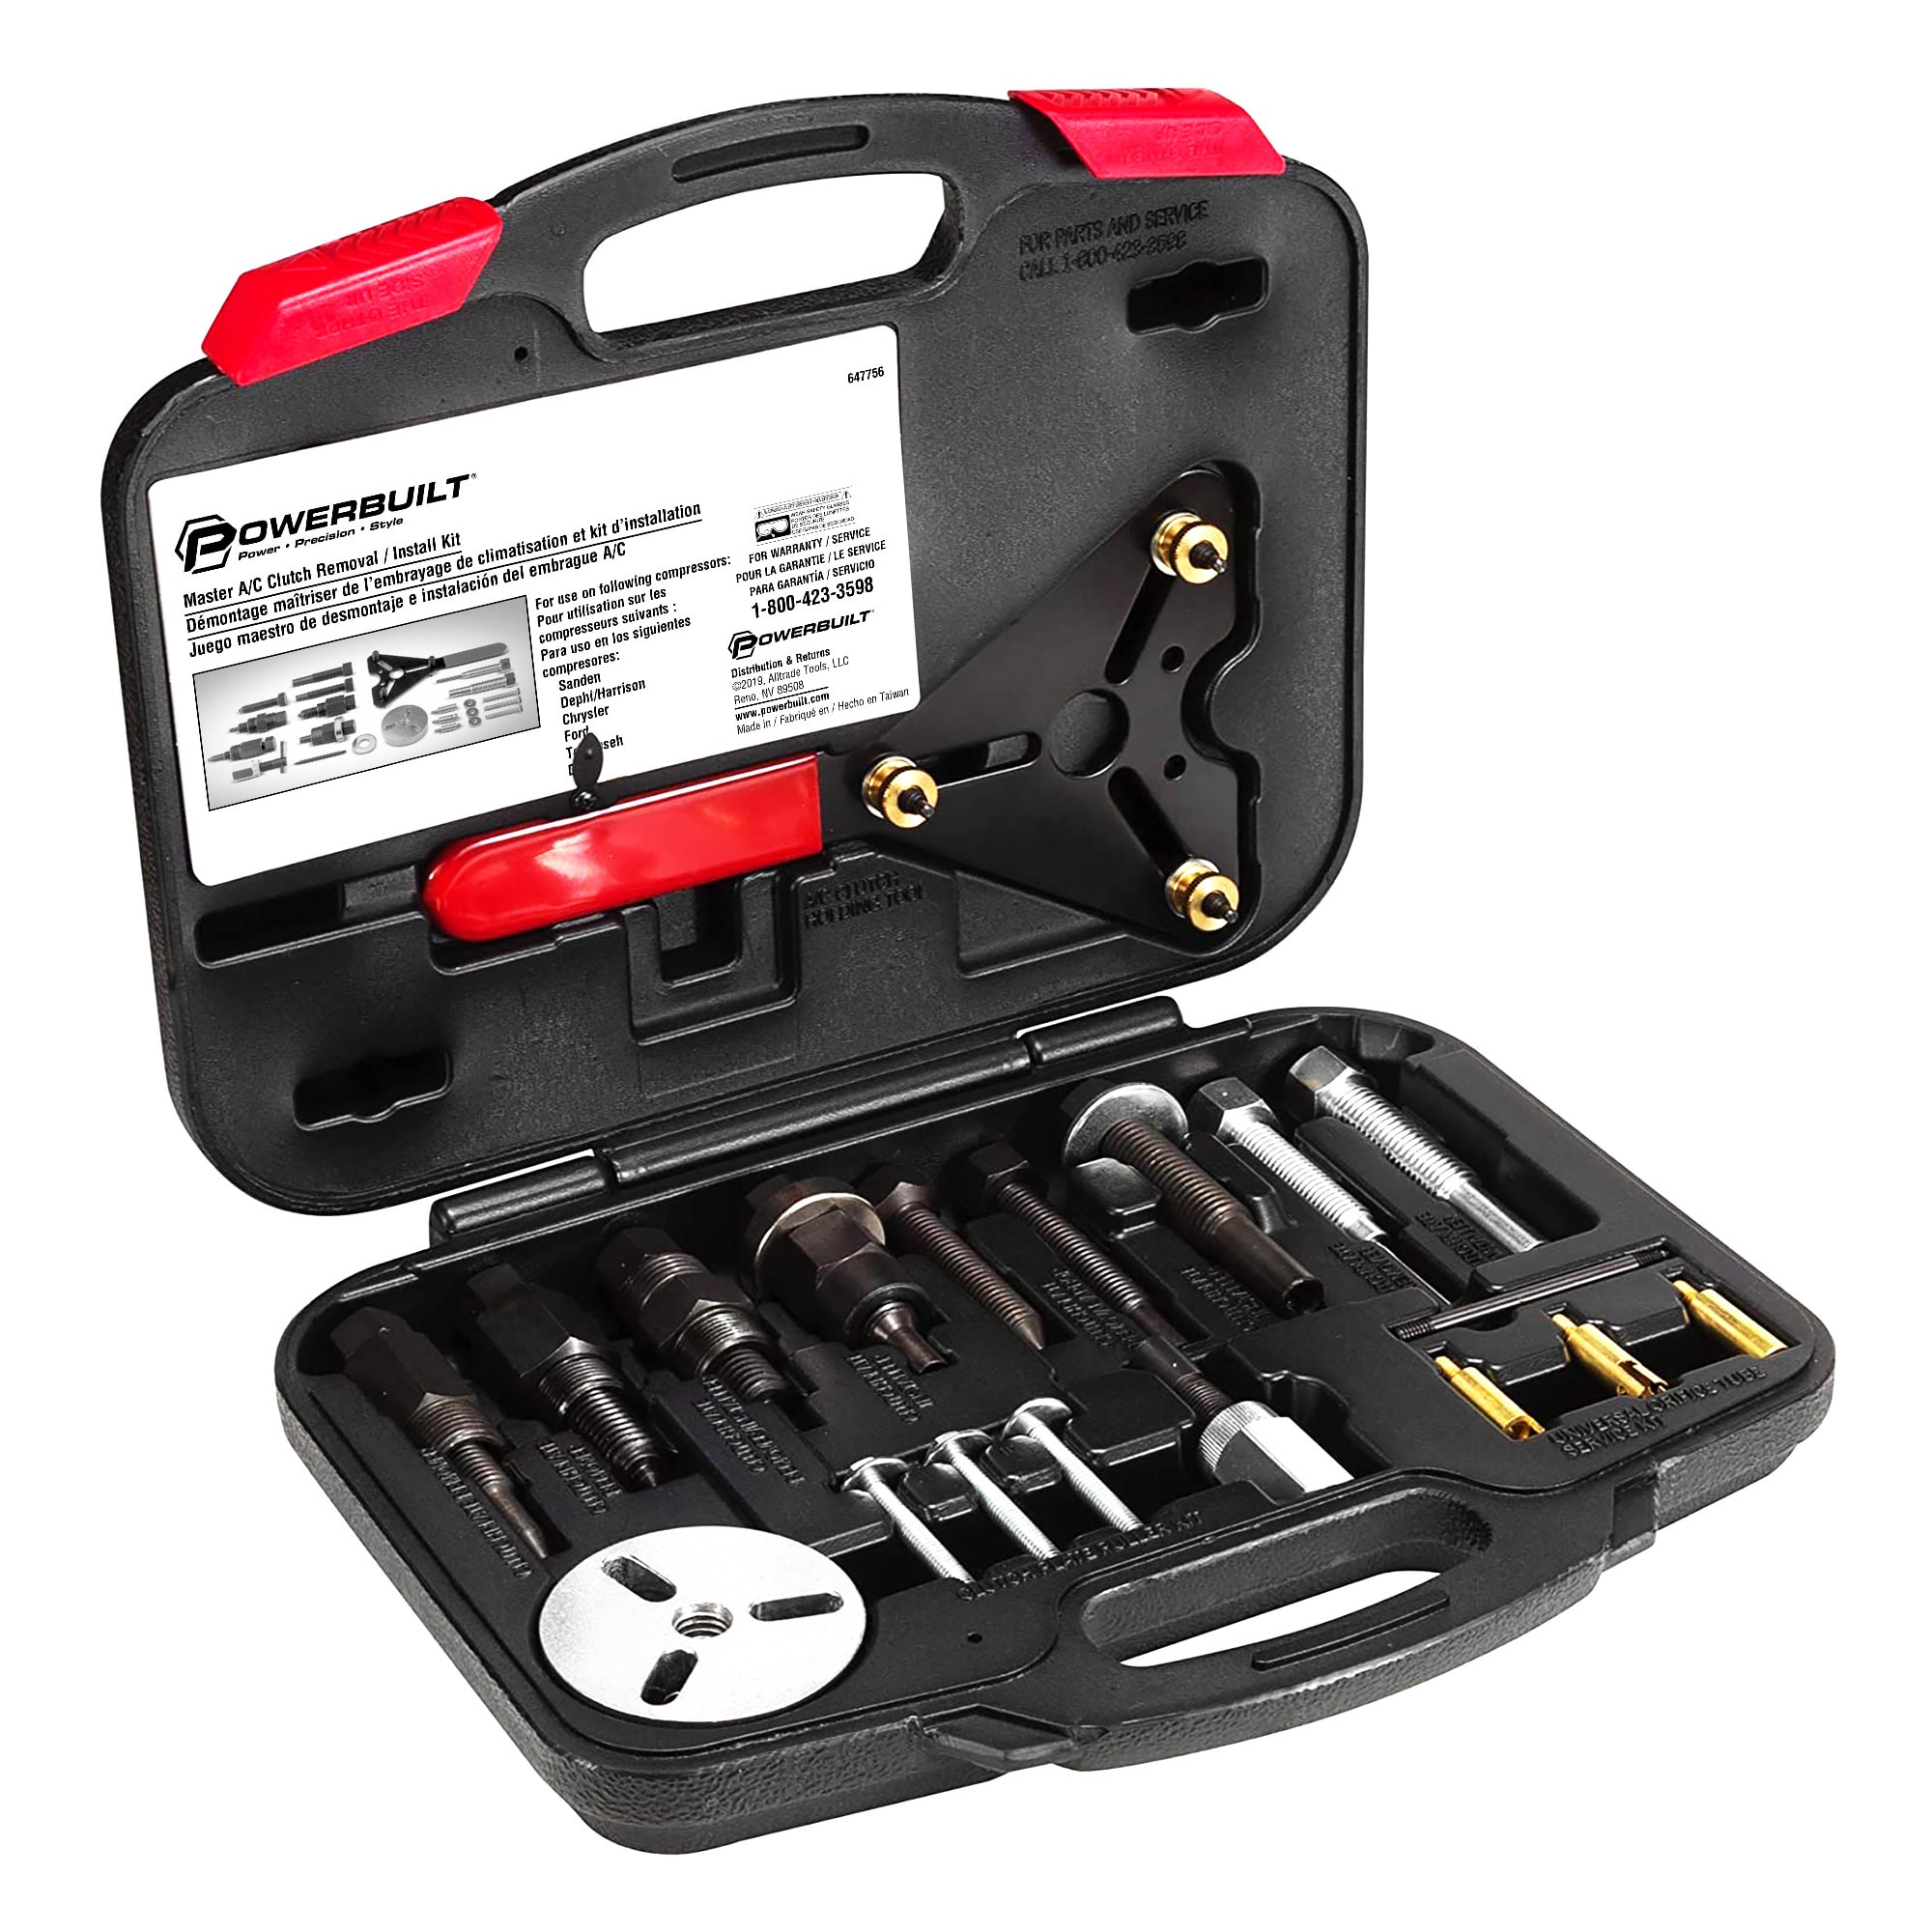 Powerbuilt - Master Fan Clutch Wrench Set KIT127, Specialty Tools